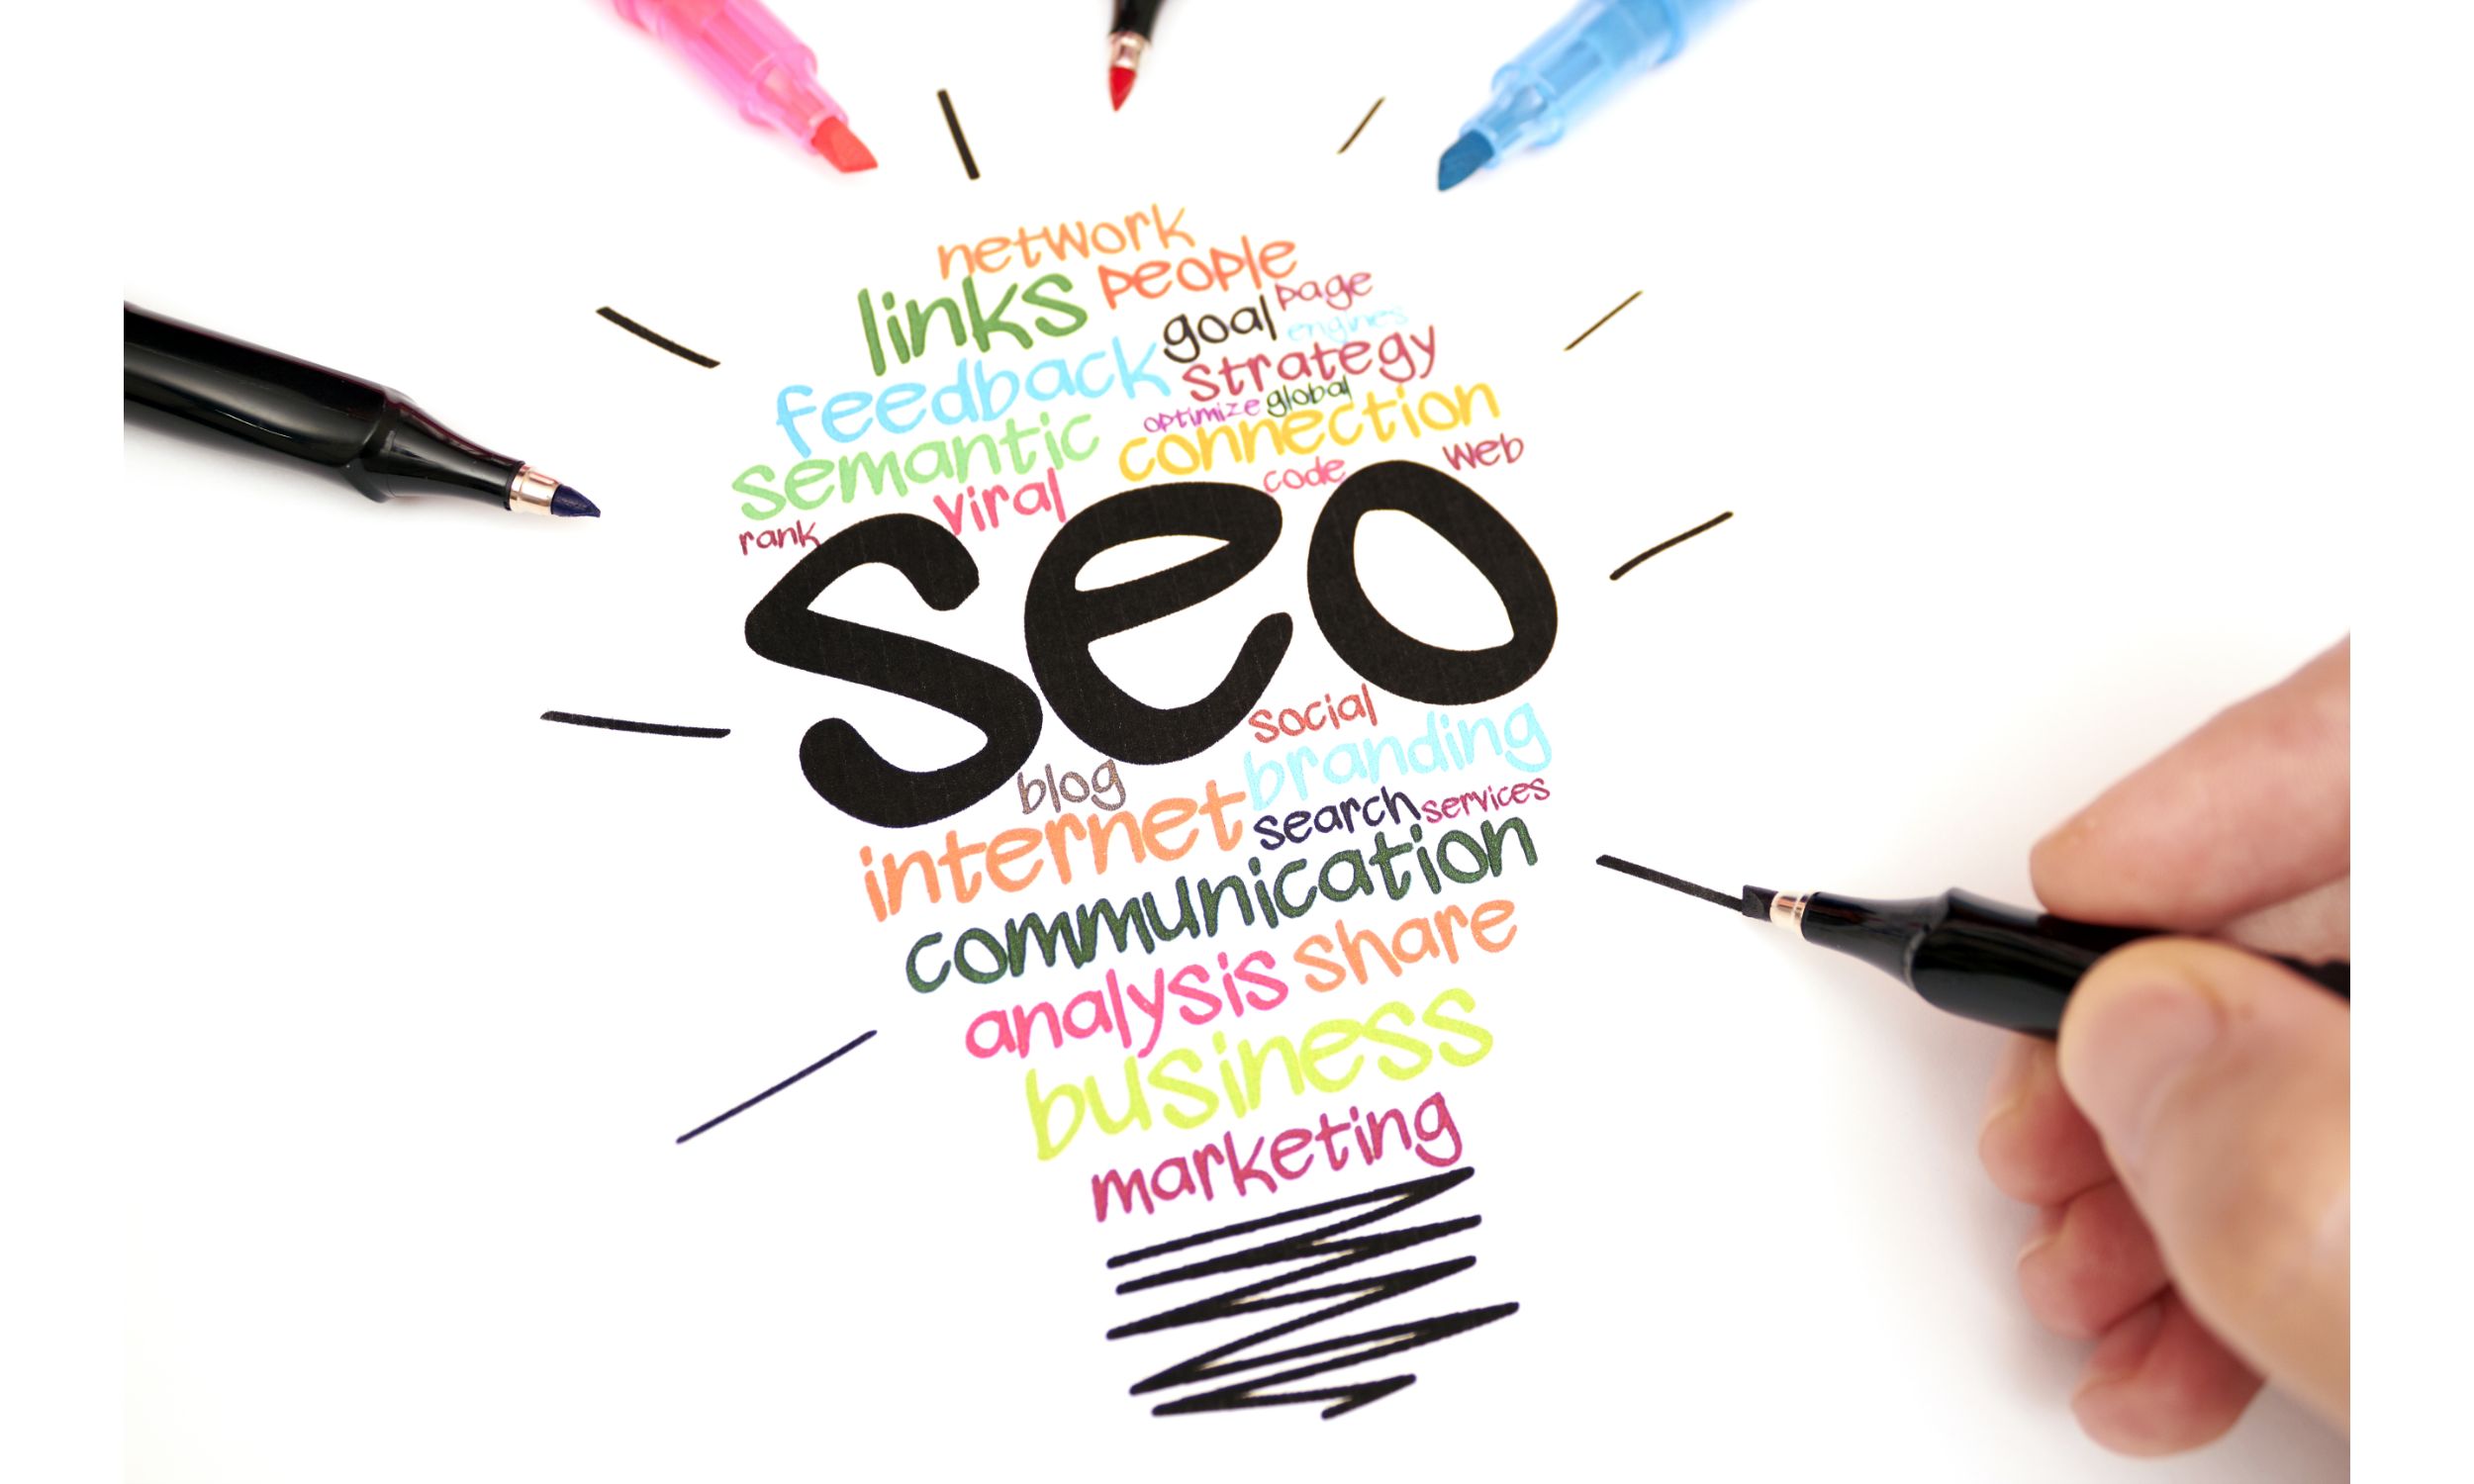 What is SEO and how to learn it?